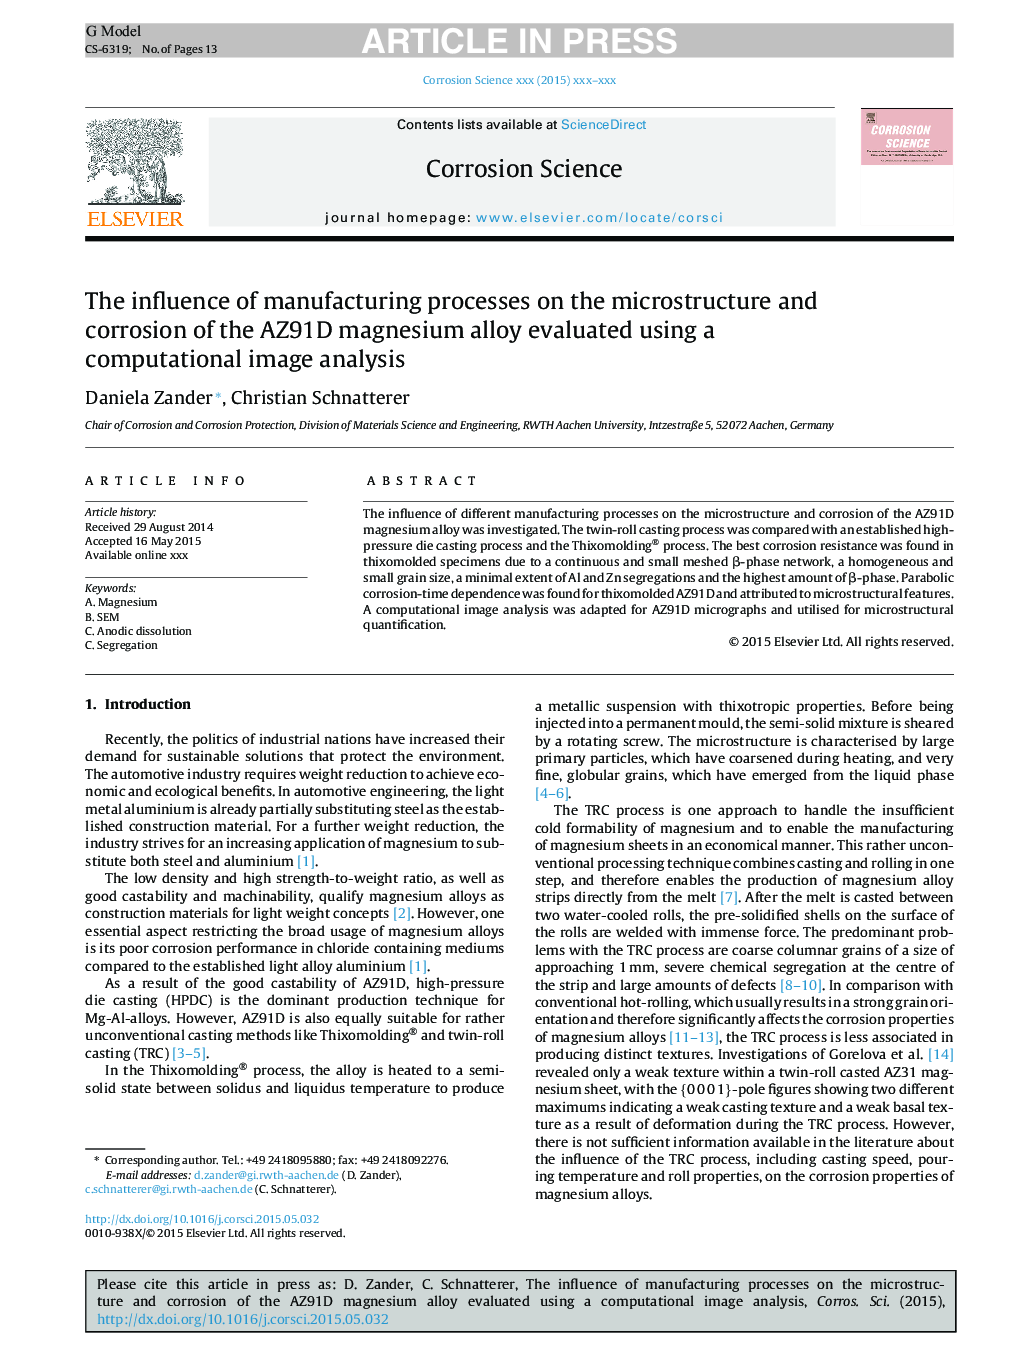 The influence of manufacturing processes on the microstructure and corrosion of the AZ91D magnesium alloy evaluated using a computational image analysis